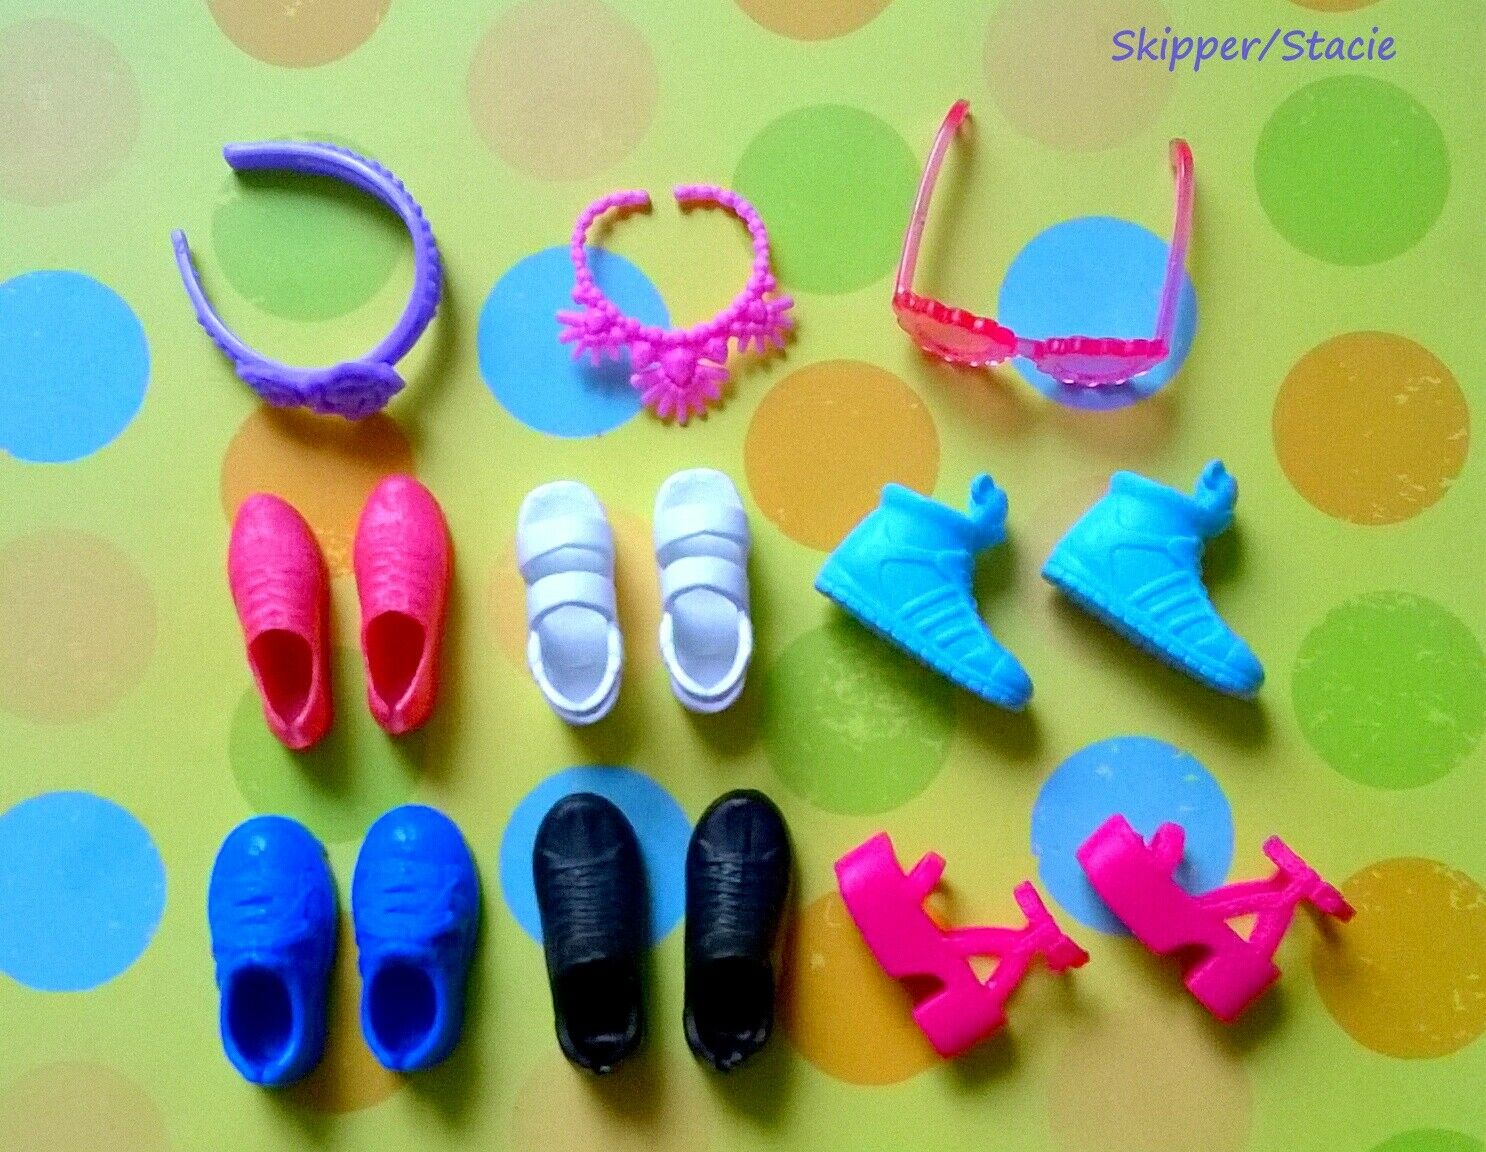 🌺barbie Sister Skipper Stacie Doll Shoes Lot Of 6 Pairs Plus Accessories Htf🌻